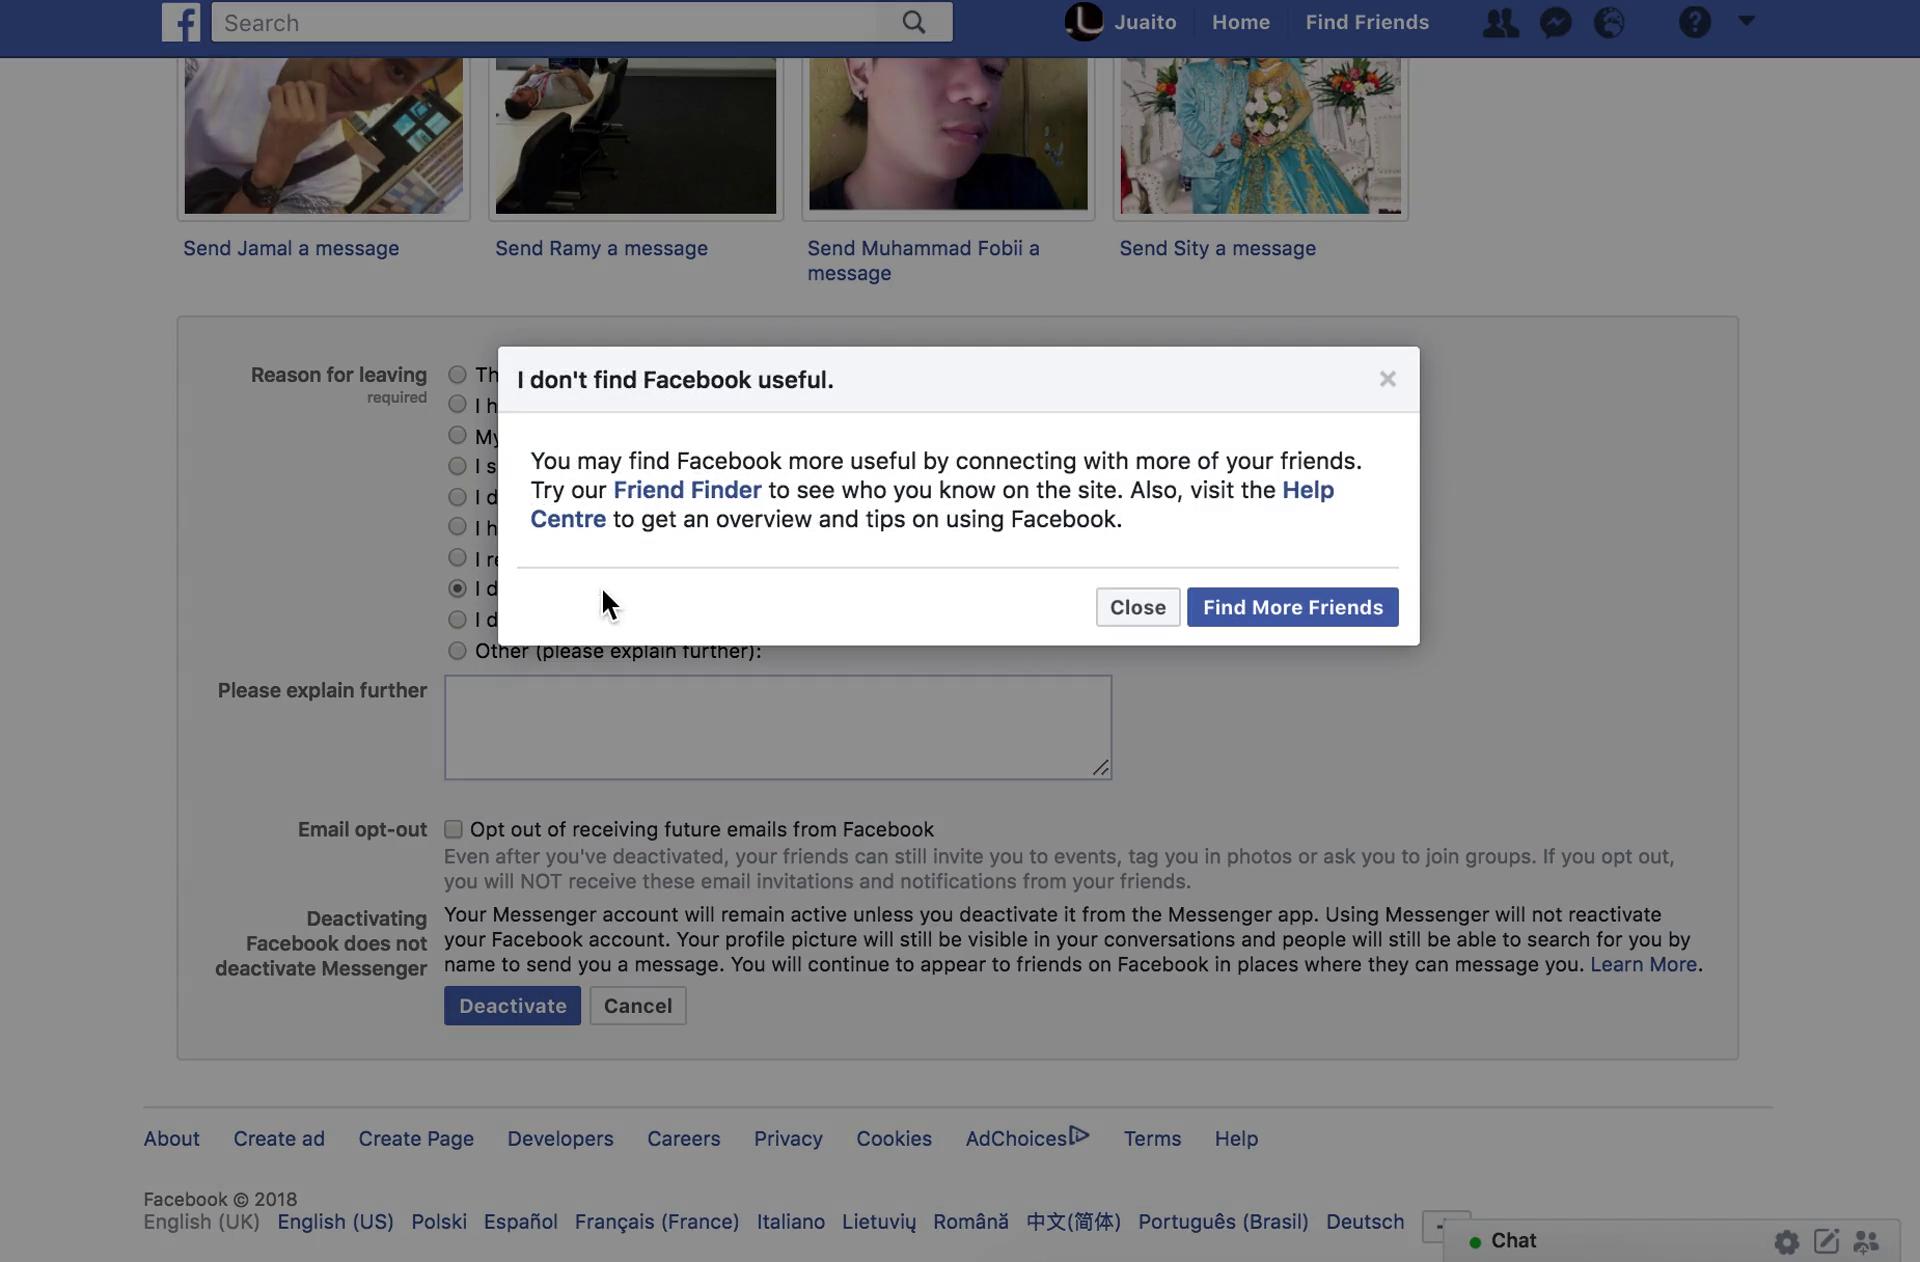 A modal showing a possible solution to our issue with Facebook that's causing us to deactivate